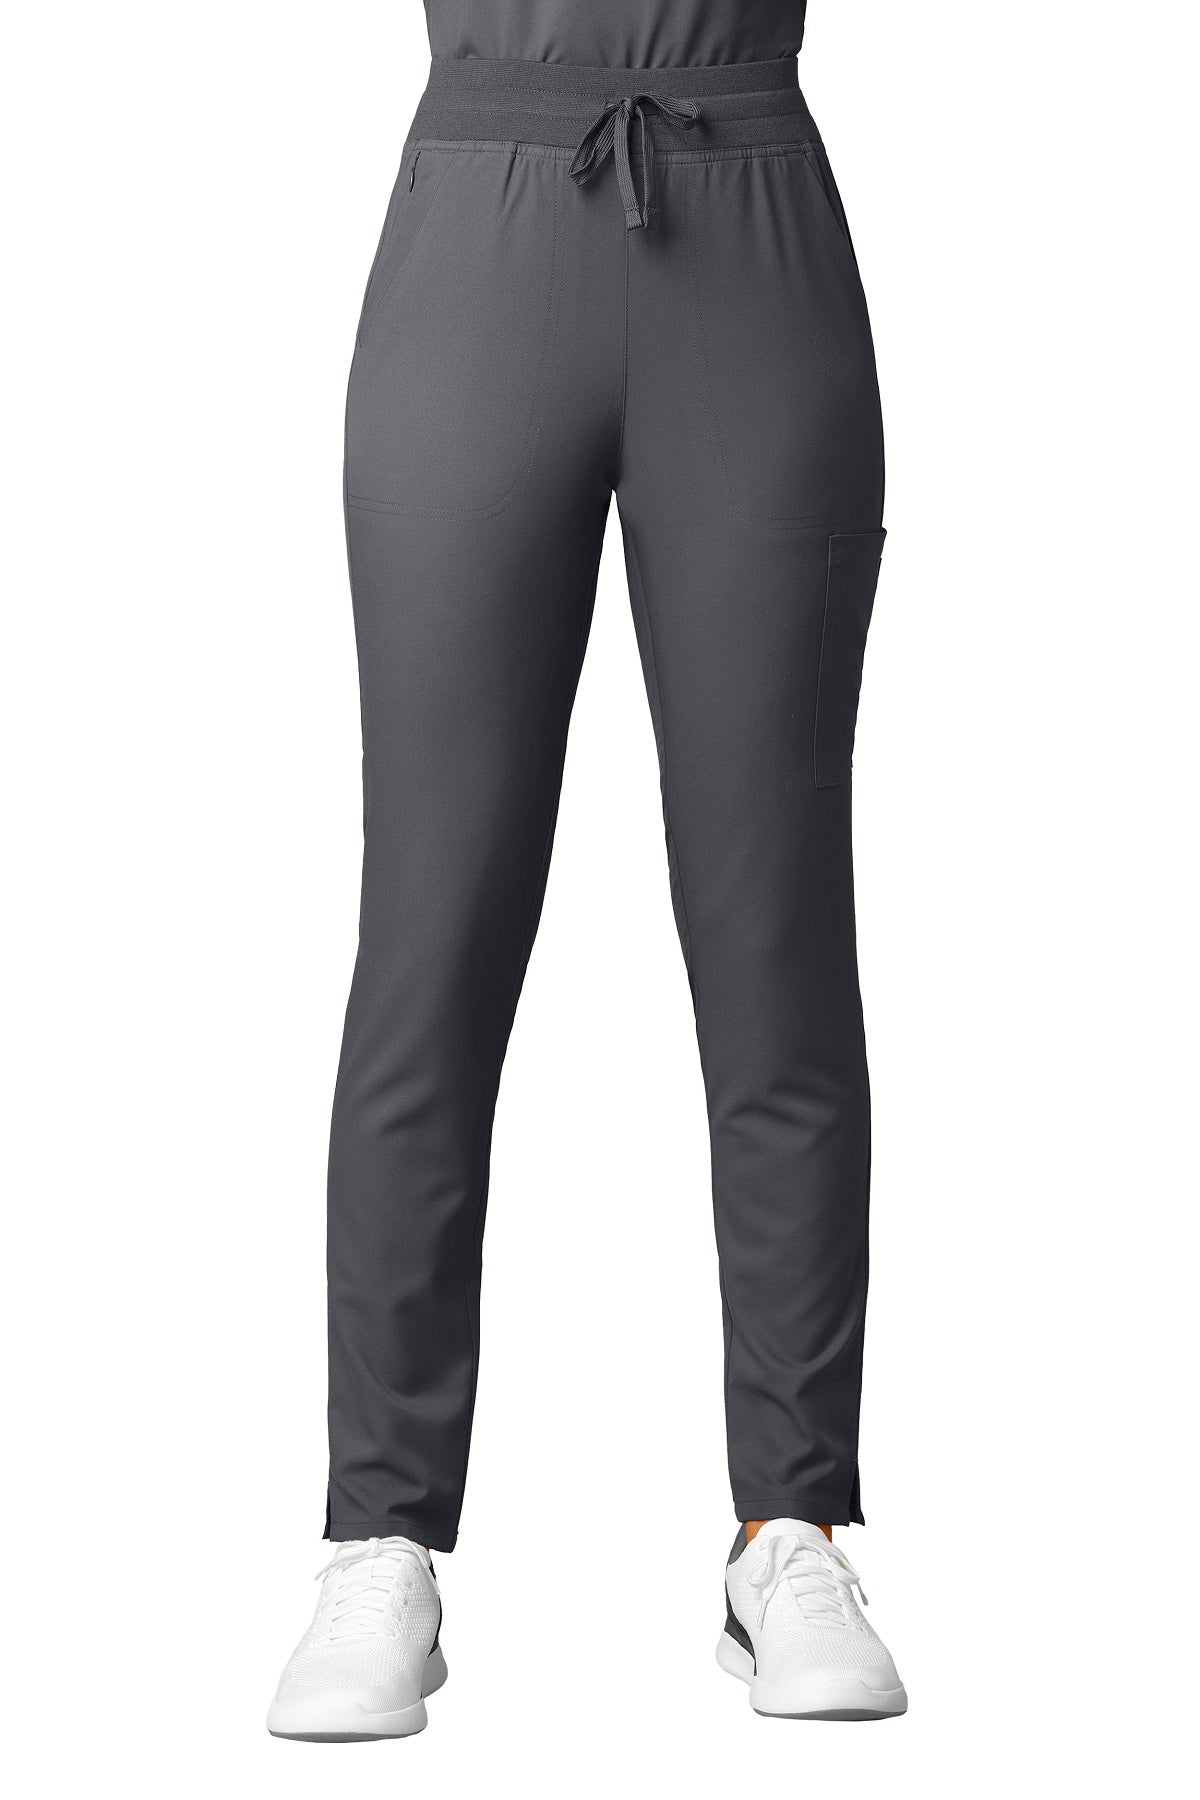 WonderWink Scrub Pants Thrive Cargo Straight Slim petite length in pewter at Parker's Clothing and Shoes.